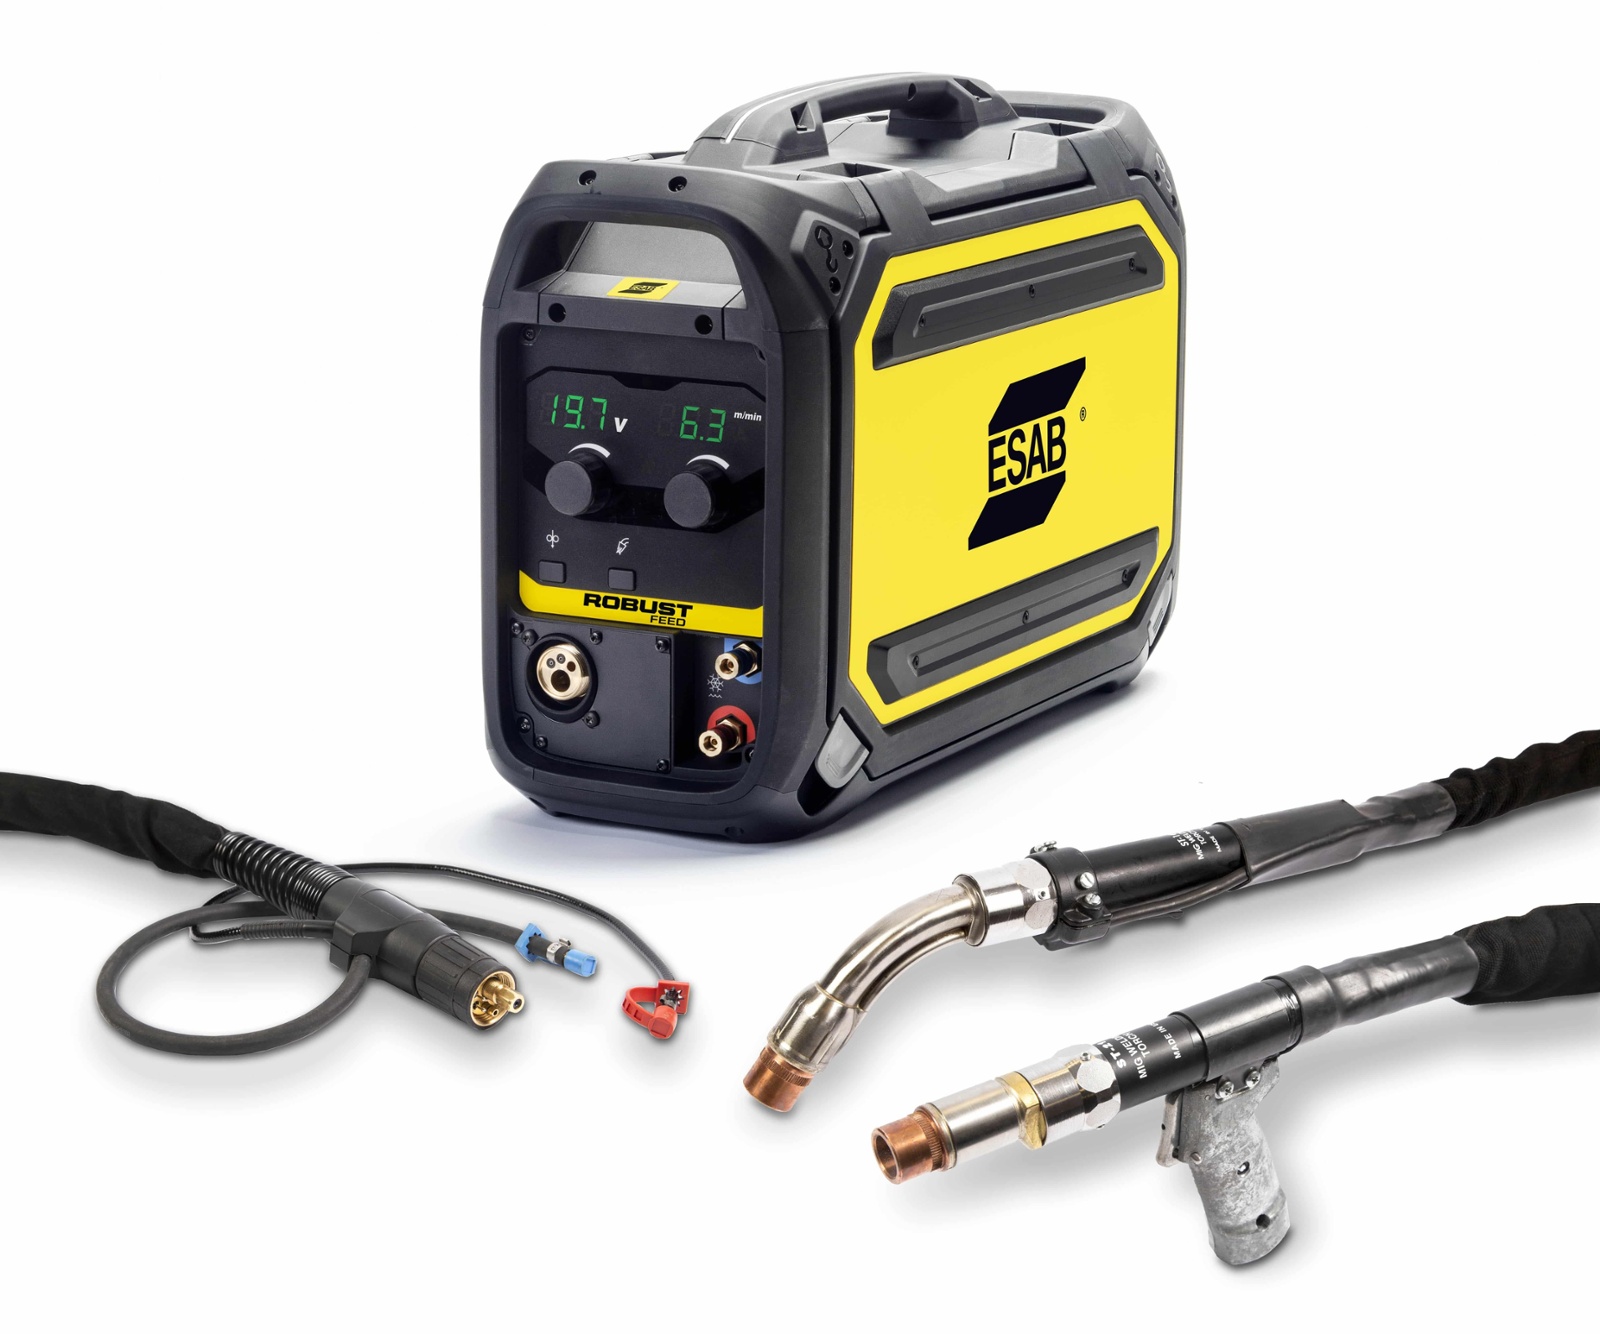 ESAB ST-16 ST-21 MIG GUNS FOR EXTREME DUTY APPLICATIONS NOW AVAILABLE WITH EURO-STYLE BACK-END CONNECTION